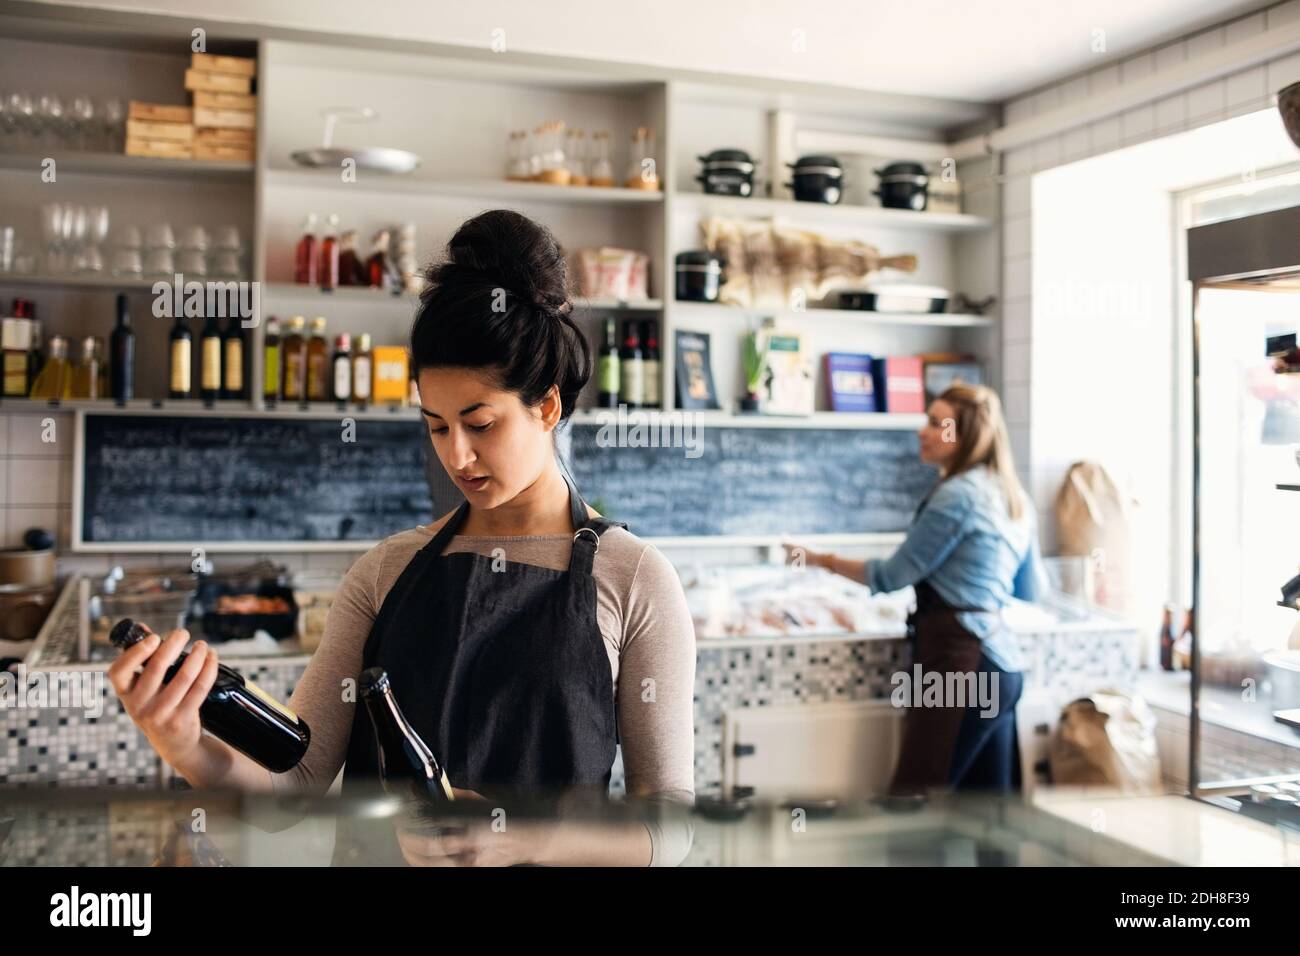 Confident woman checking bottles while colleague standing in background at retail display Stock Photo